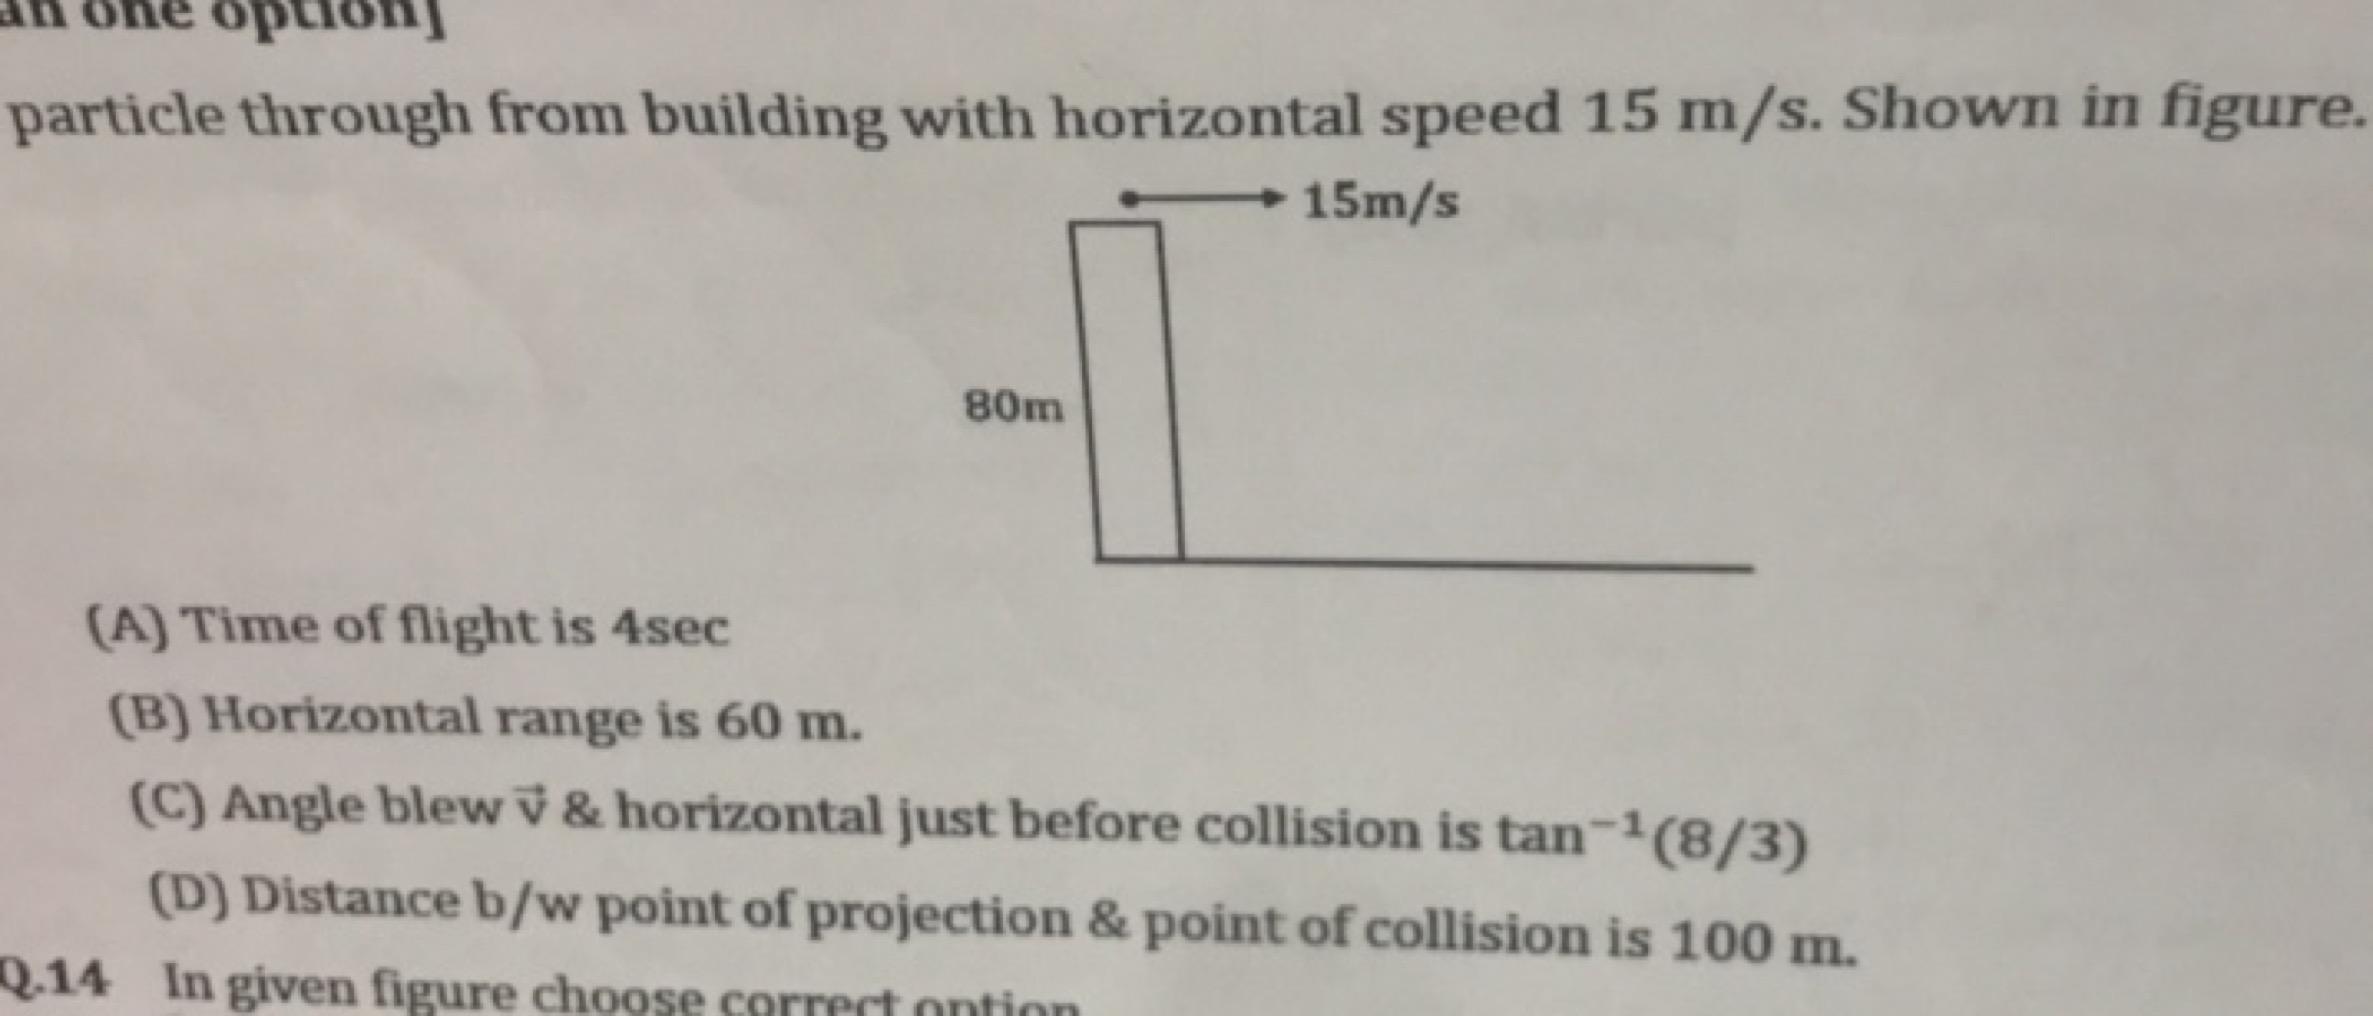 particle through from building with horizontal speed 15 m/s. Shown in 